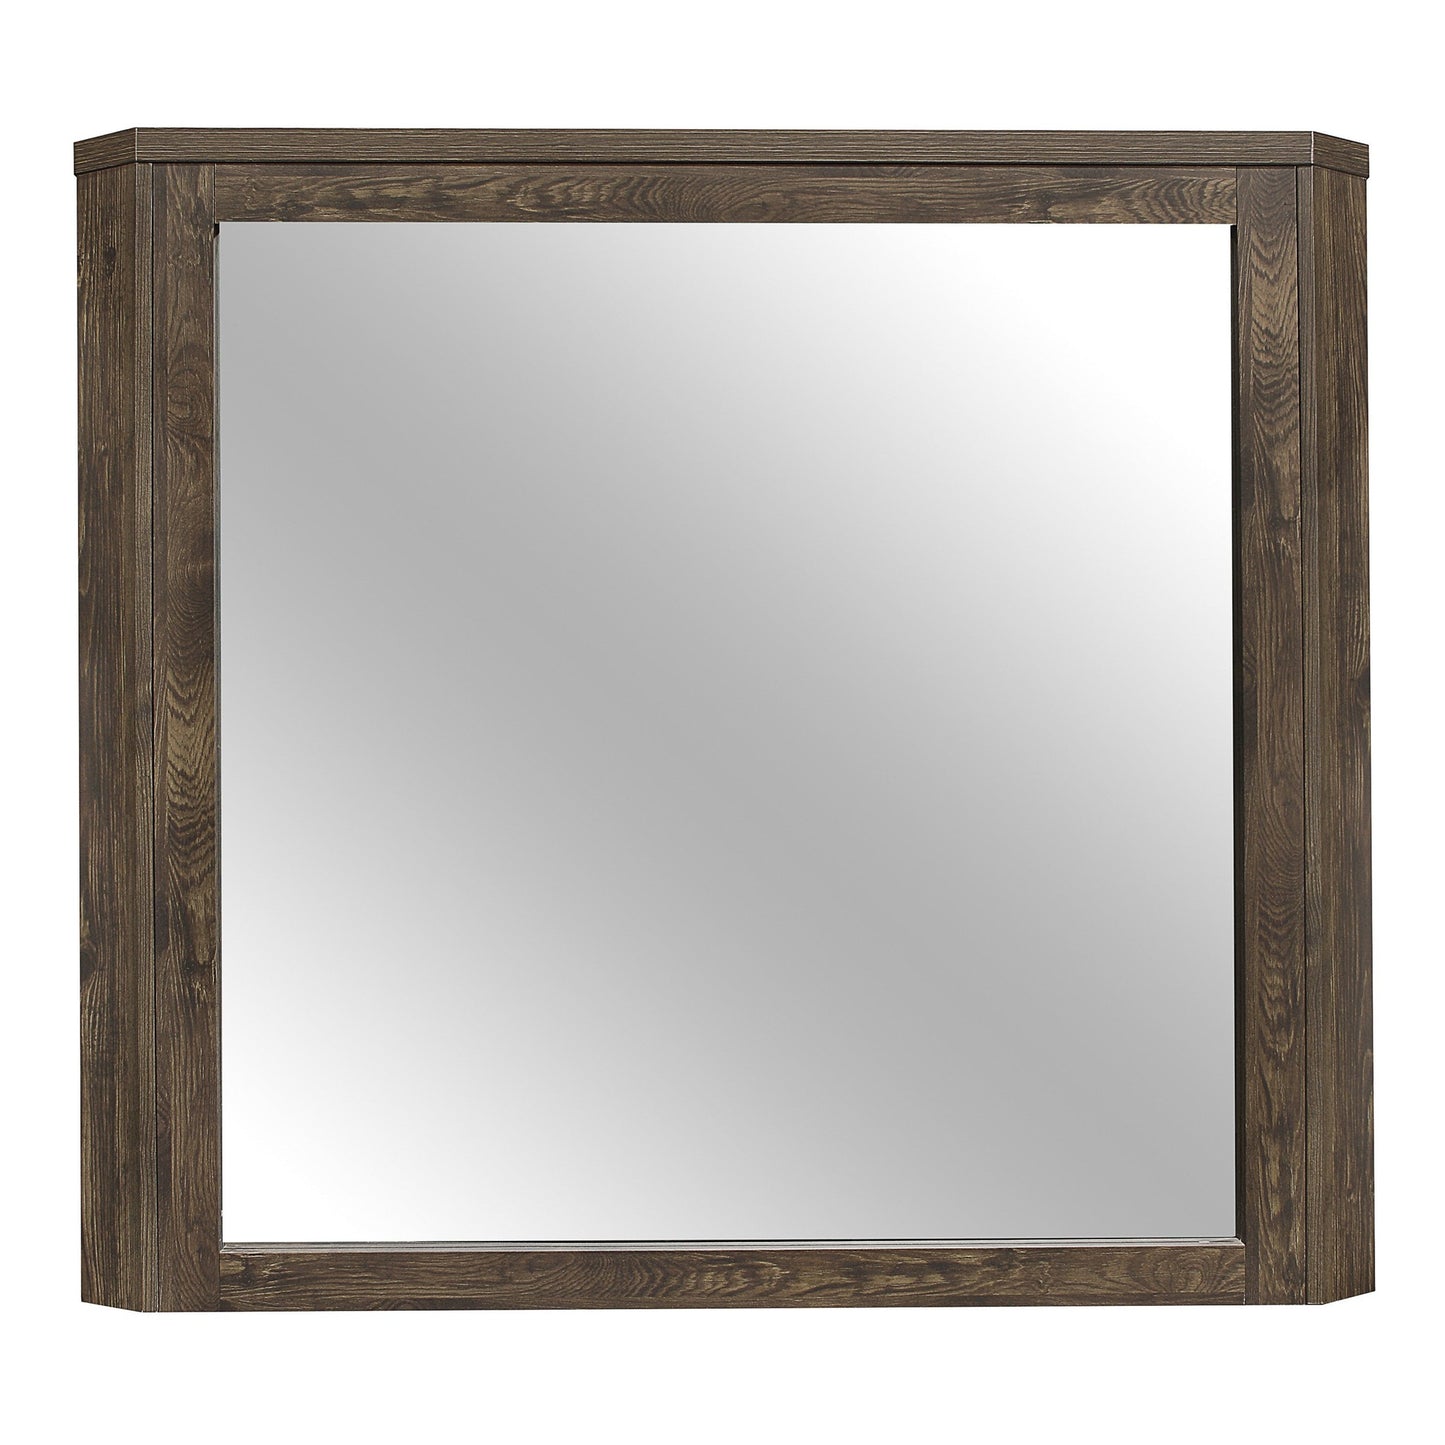 Benzara Rustic Brown Rectangular Mirror Wooden Frame and Clipped Corners